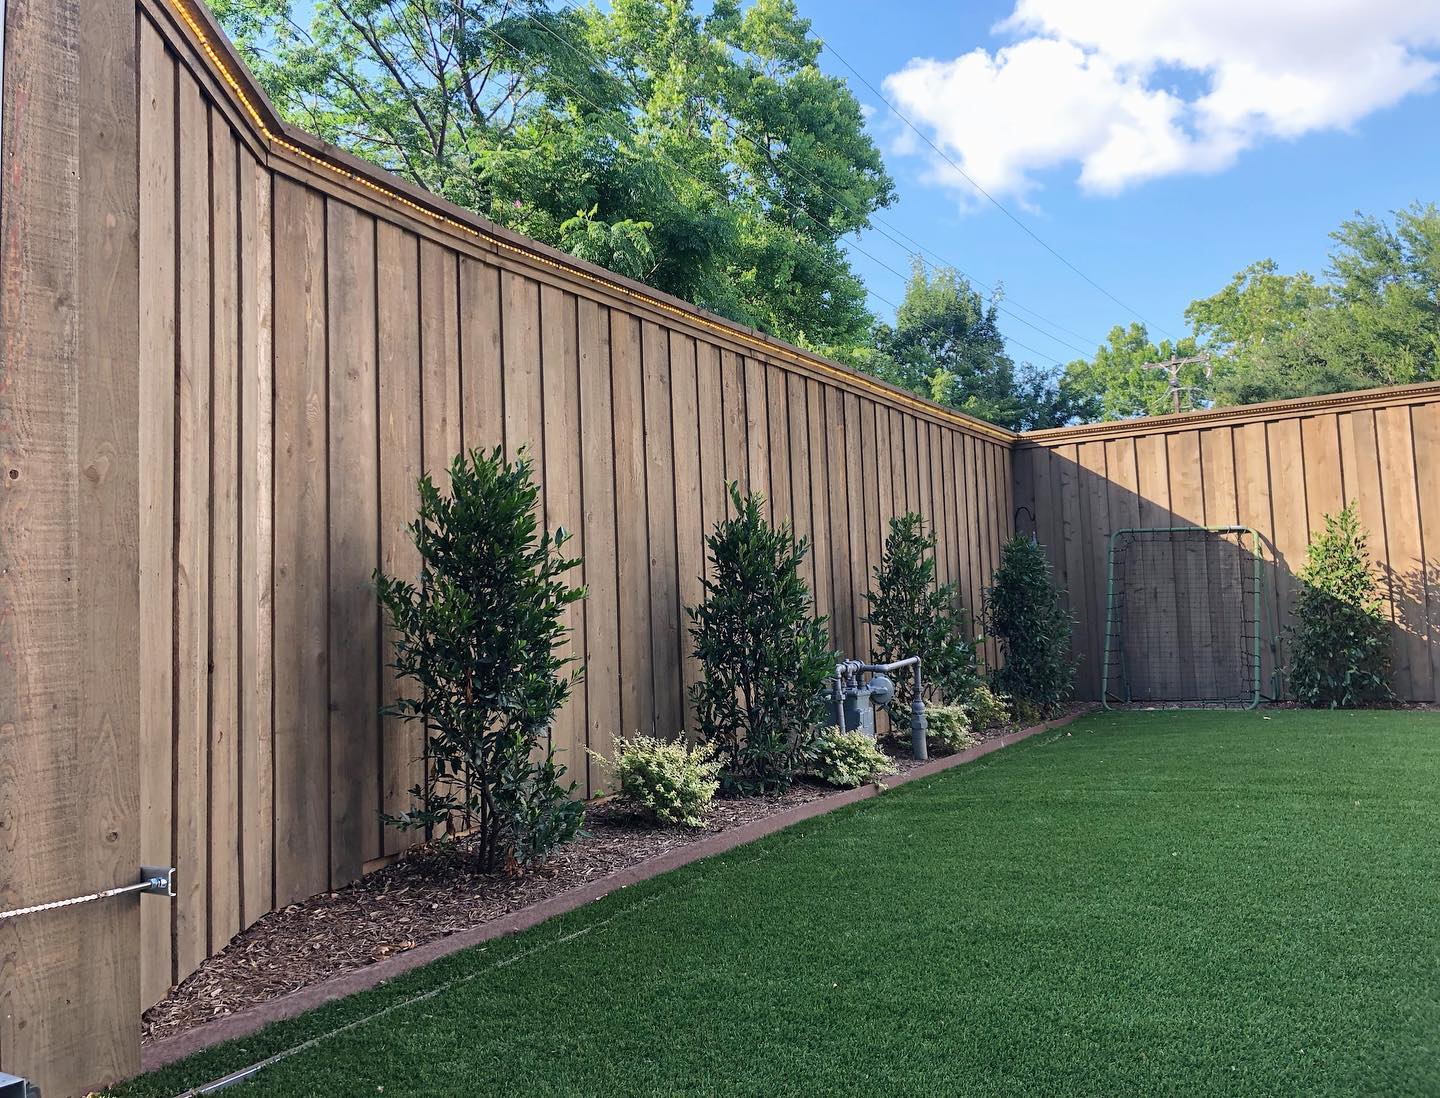 A traditional fence will never go out of style, but we always prefer the cleaner look of clear cedar wood. It elevates the fence and gives it a more modern look. If you look closely, you'll see that we added a string of lights to the trim of the fence. Do you like it? Comment, like or share! ❤️👍🏼

#customfence #fencing #woodfence #cedarfence #modernfence #dallasfence #dallasfencing #fencing #customfencing #texasfence #texascontractor #dallascontractor #dallasconstruction #texasconstruction #outdoorliving #homeimprovement #backyard #backyardfence #customwork #dallasbusiness #texasbusiness #traditionalfence #custommetalfabricator #dallaswoodworks #bhfyp